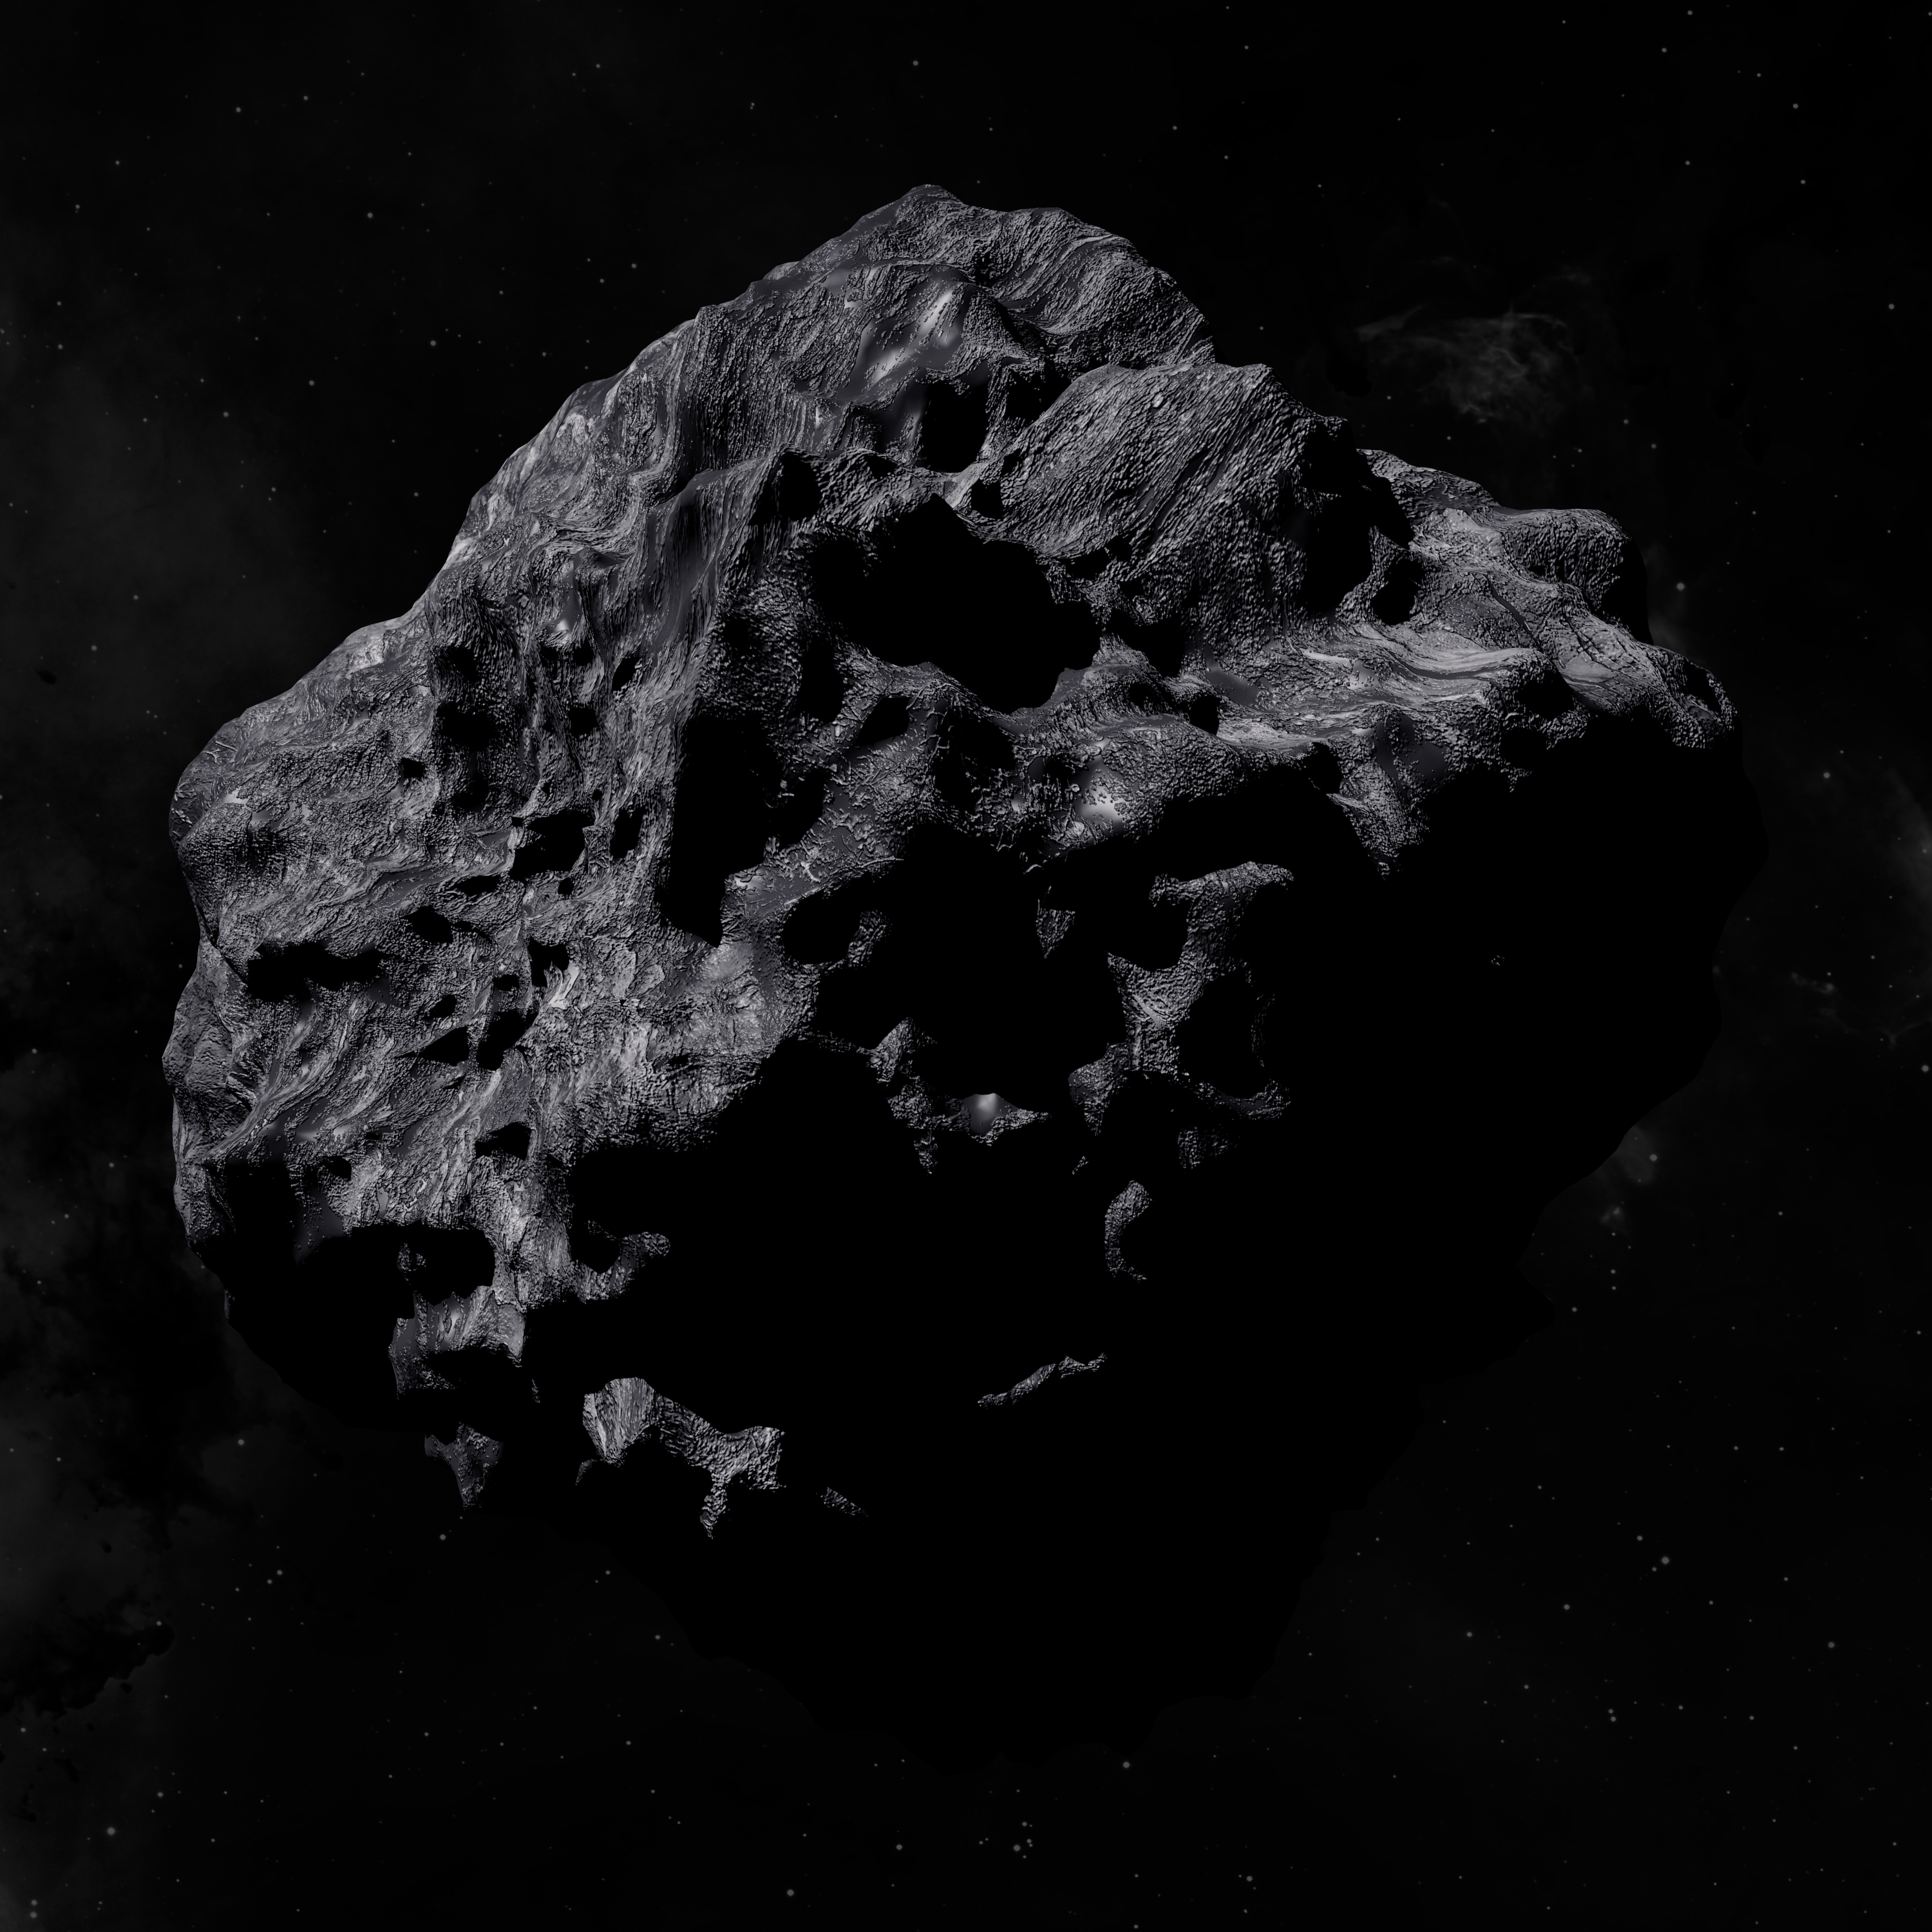 Source: Burned Pineapple Productions (2018, June 14). asteroid. flickr. https://www.flickr.com/photos/51686021@N07/42075207904